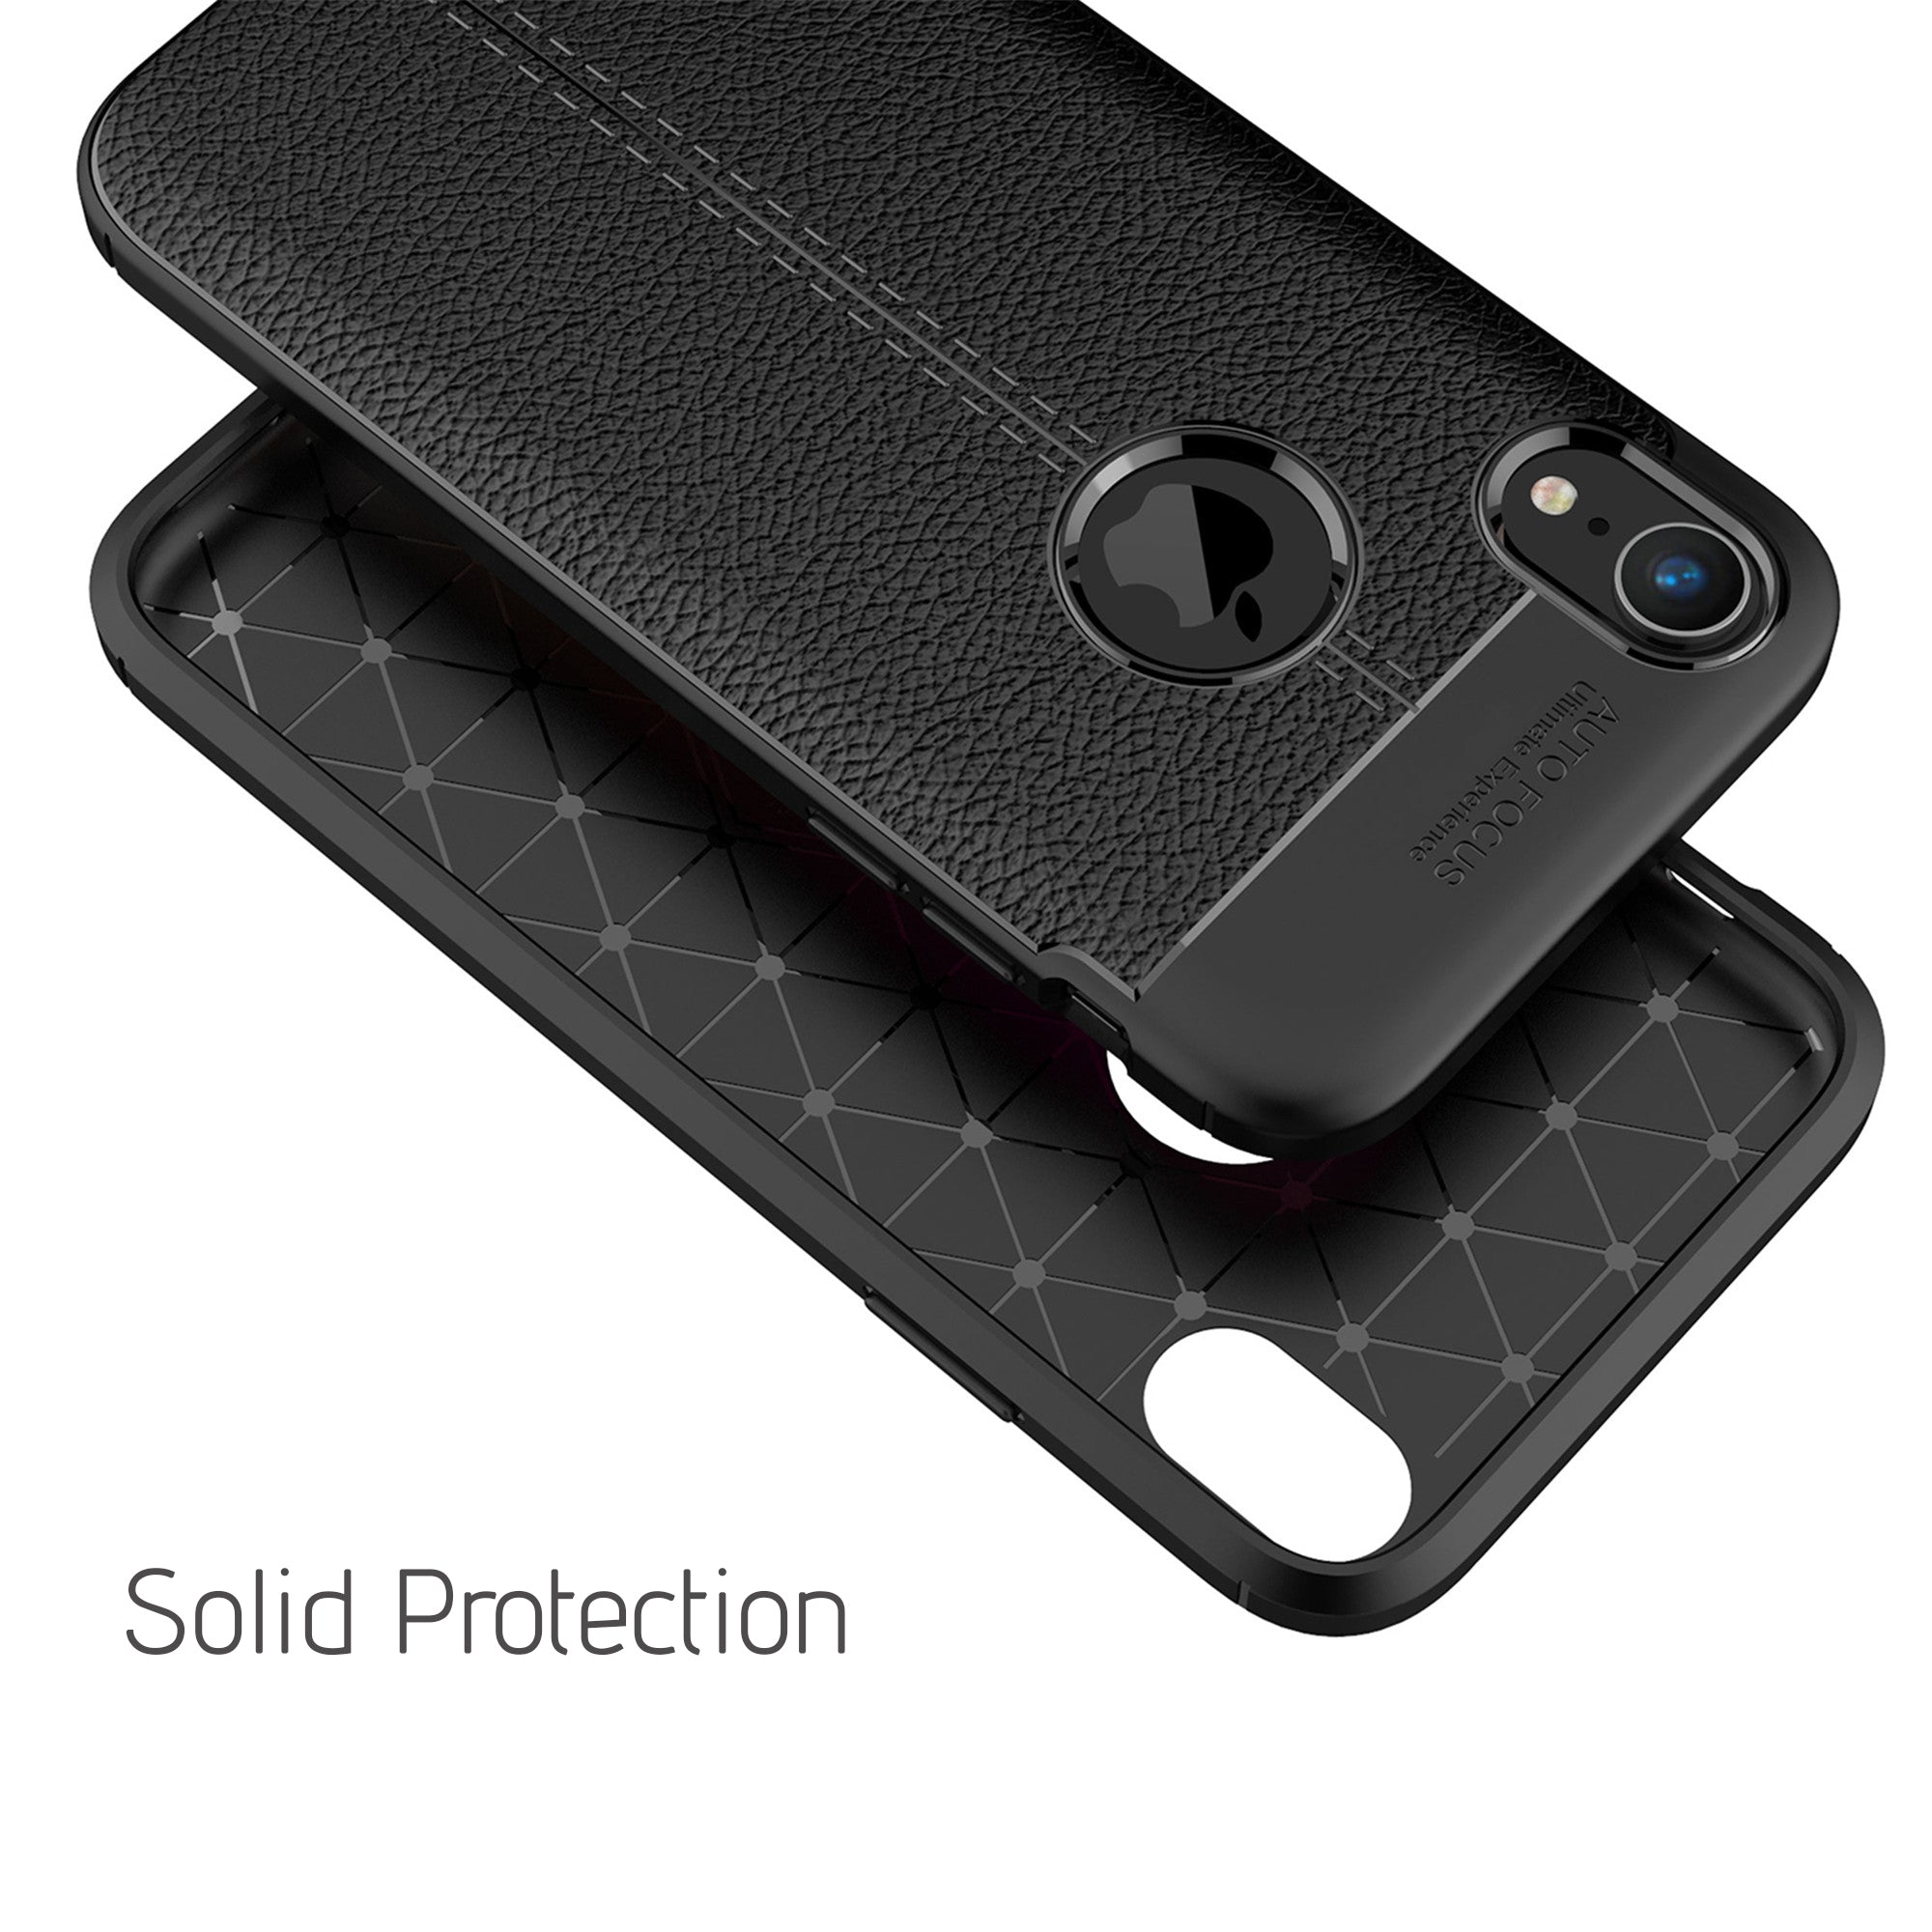 Luvvitt Case for iPhone XR TPU Flexible Protection with 6.1" Screen 2018 - Black